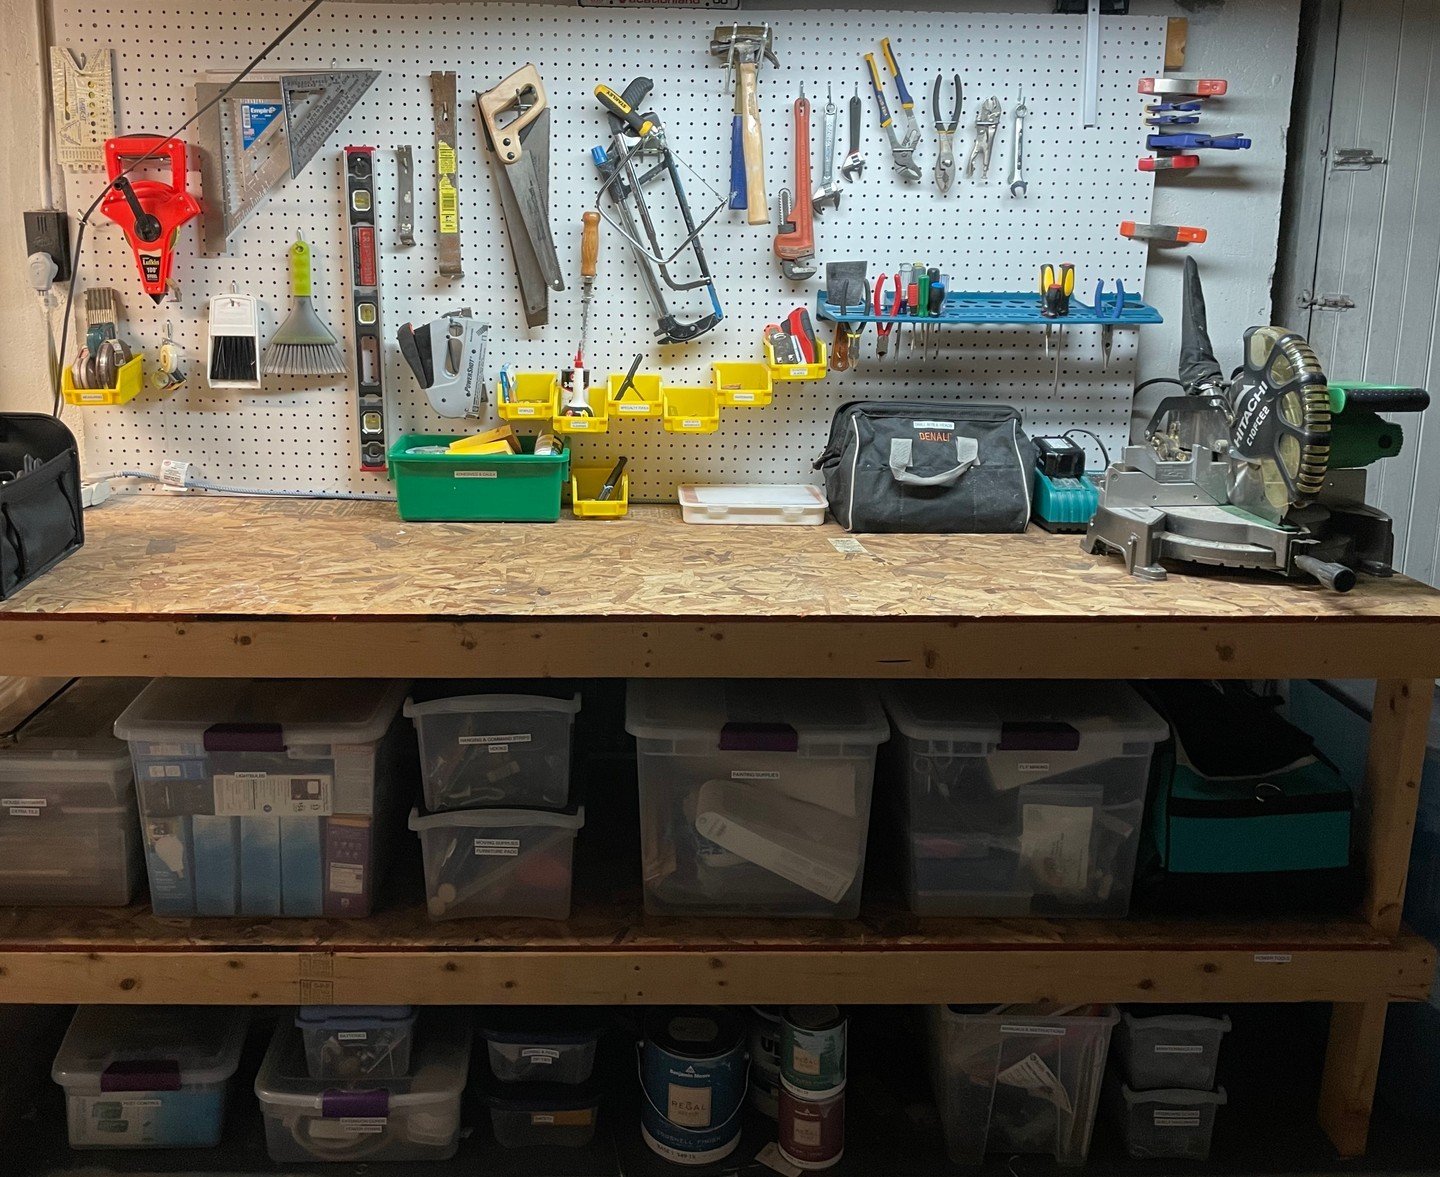 How can you organize and be eco friendly? This tool bench is one of many organizing projects without any new product - we love to re-use! Check out our latest blog post for more tips on how to reduce, re-use, and recycle the organized way ♻️🌎